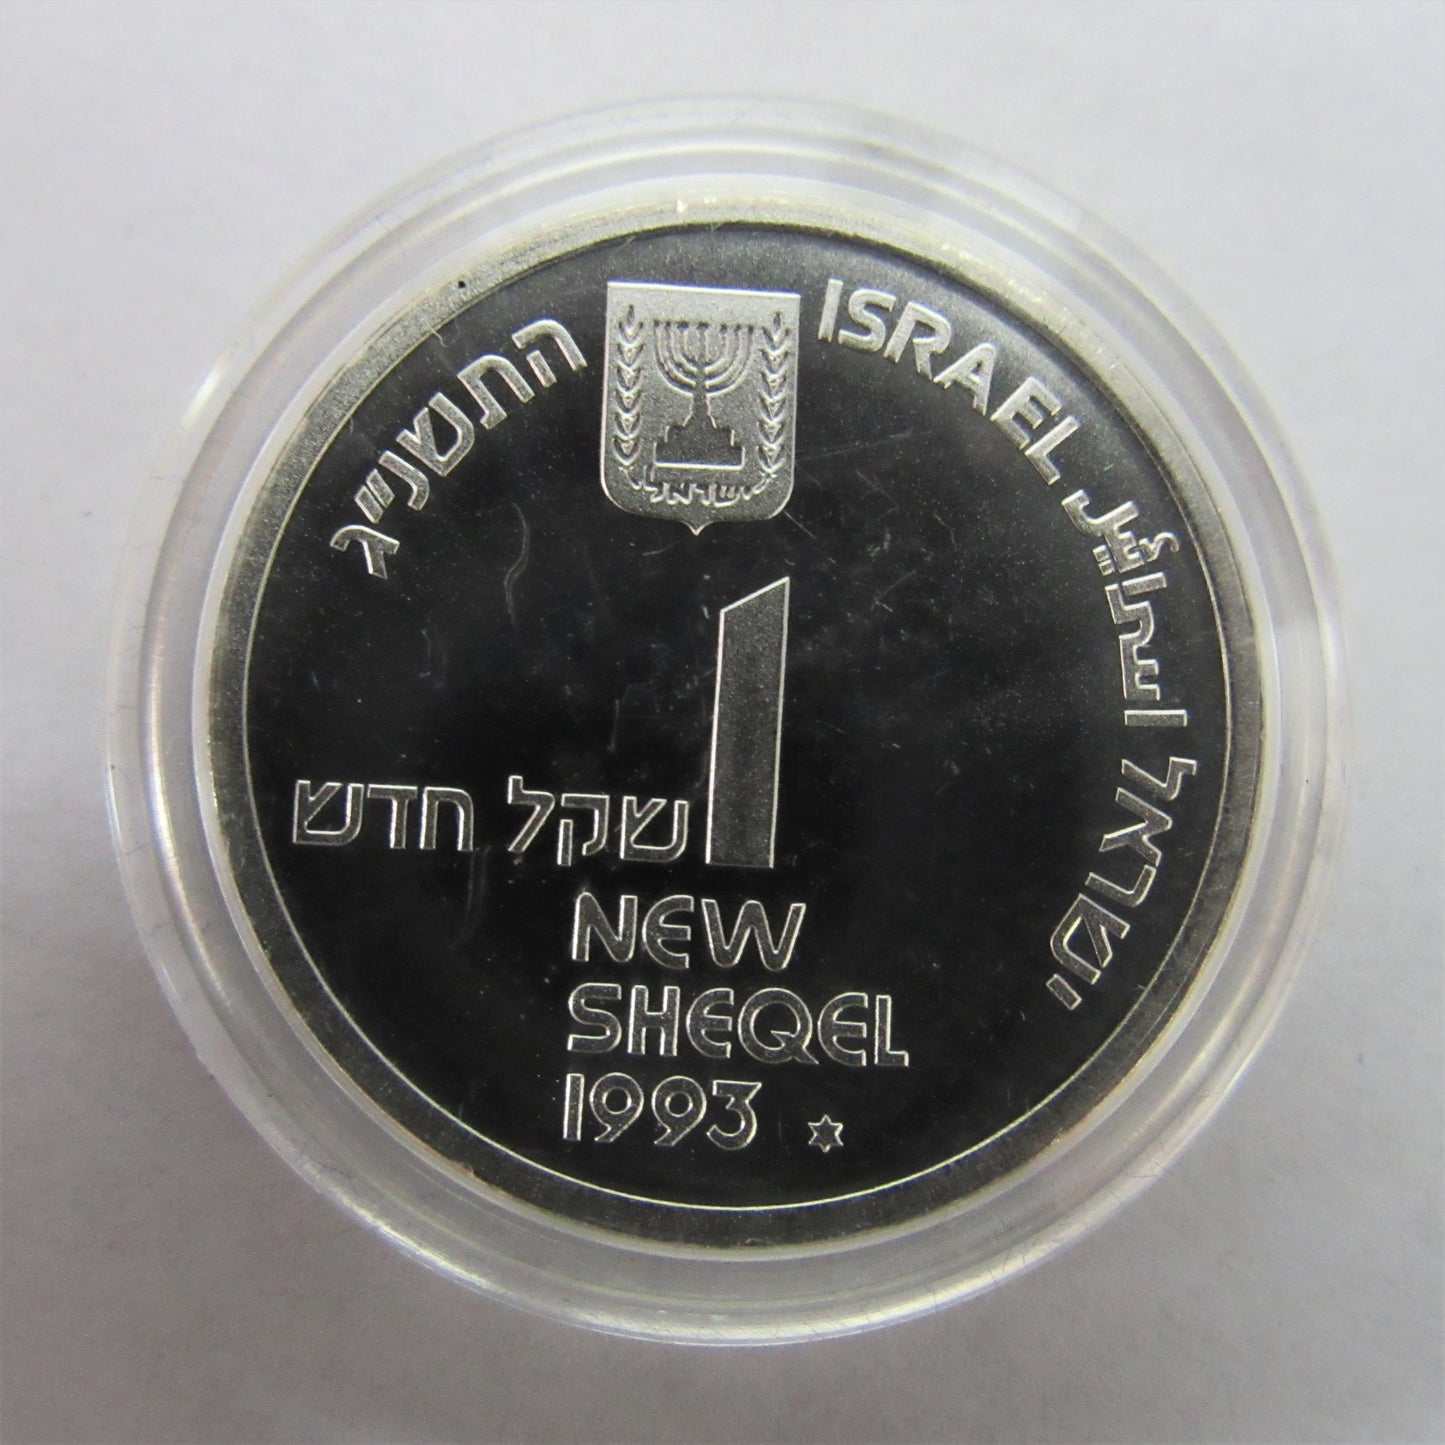 1993 Israel Independence Day Coins PR+BU Silver Coins w/ BOX & COA